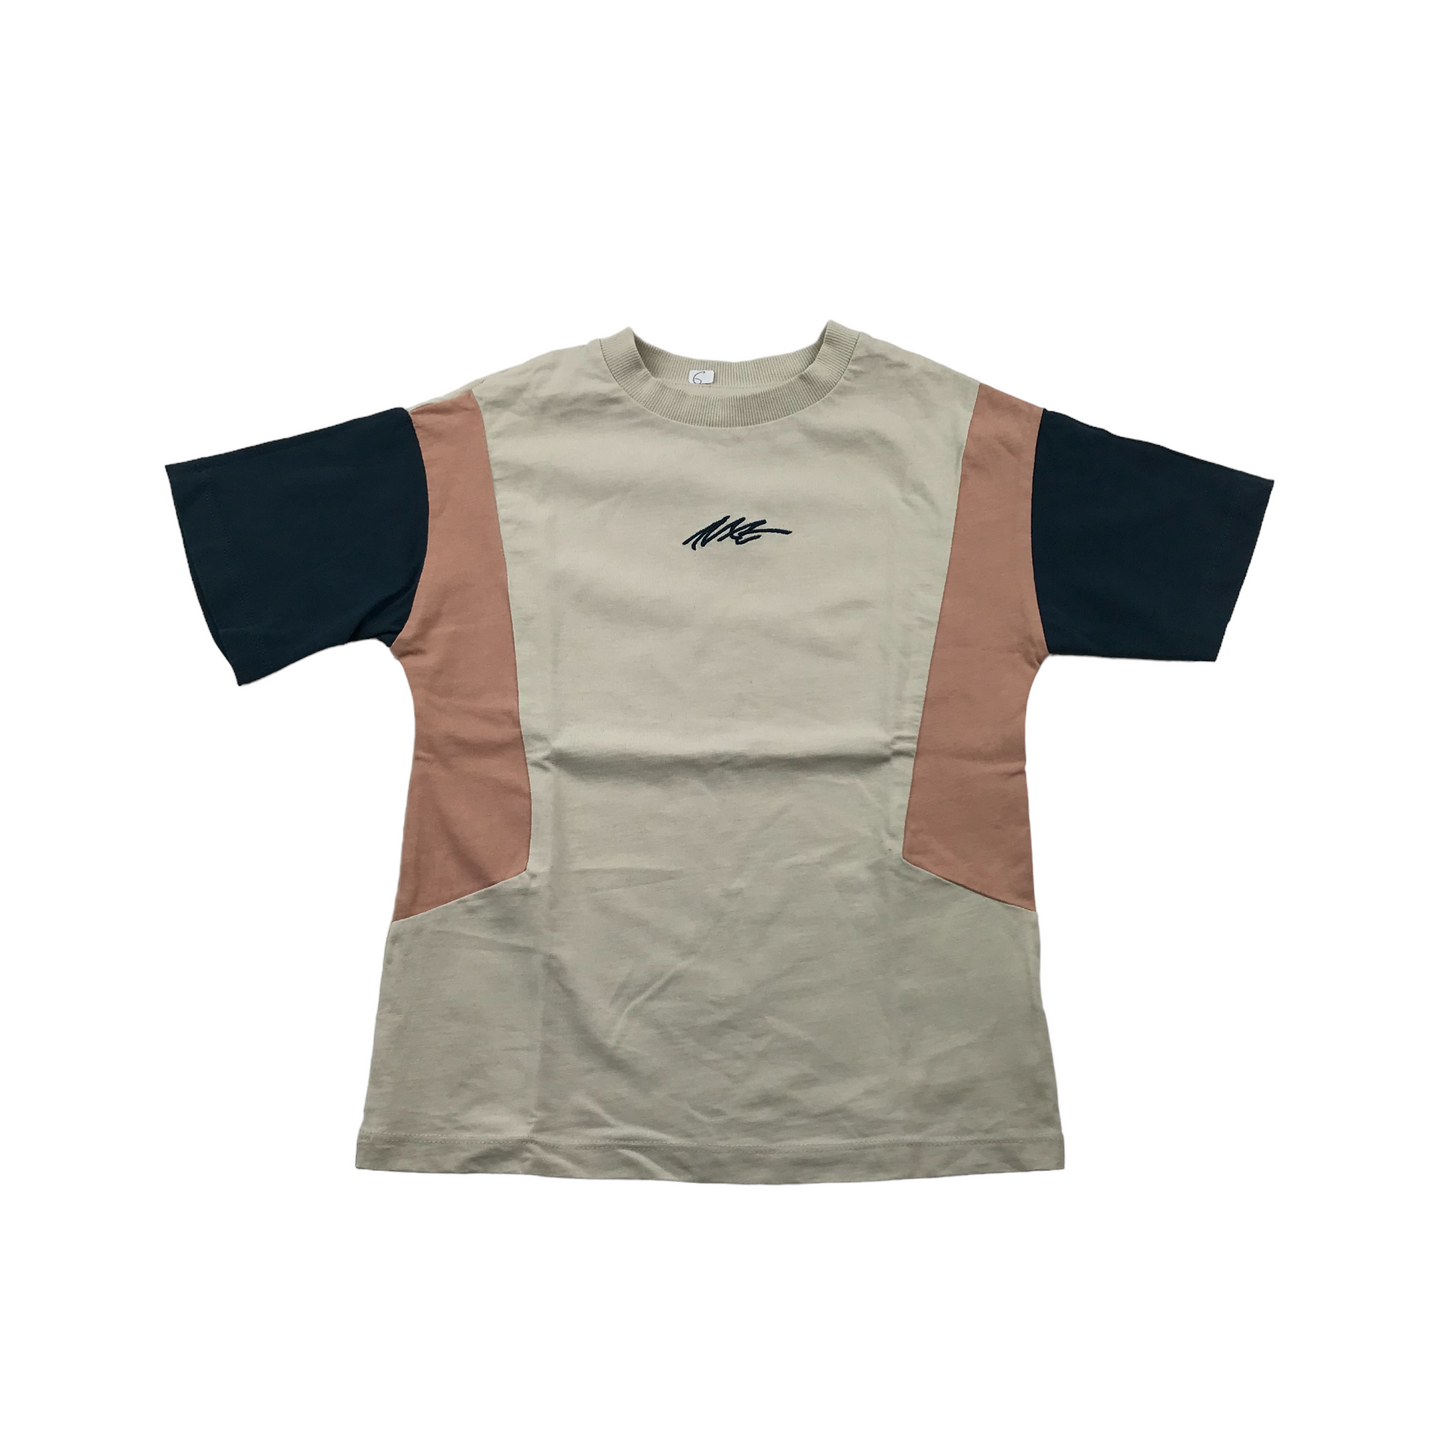 Next White and Salmon Red Cotton T-shirt Bundle Age 6